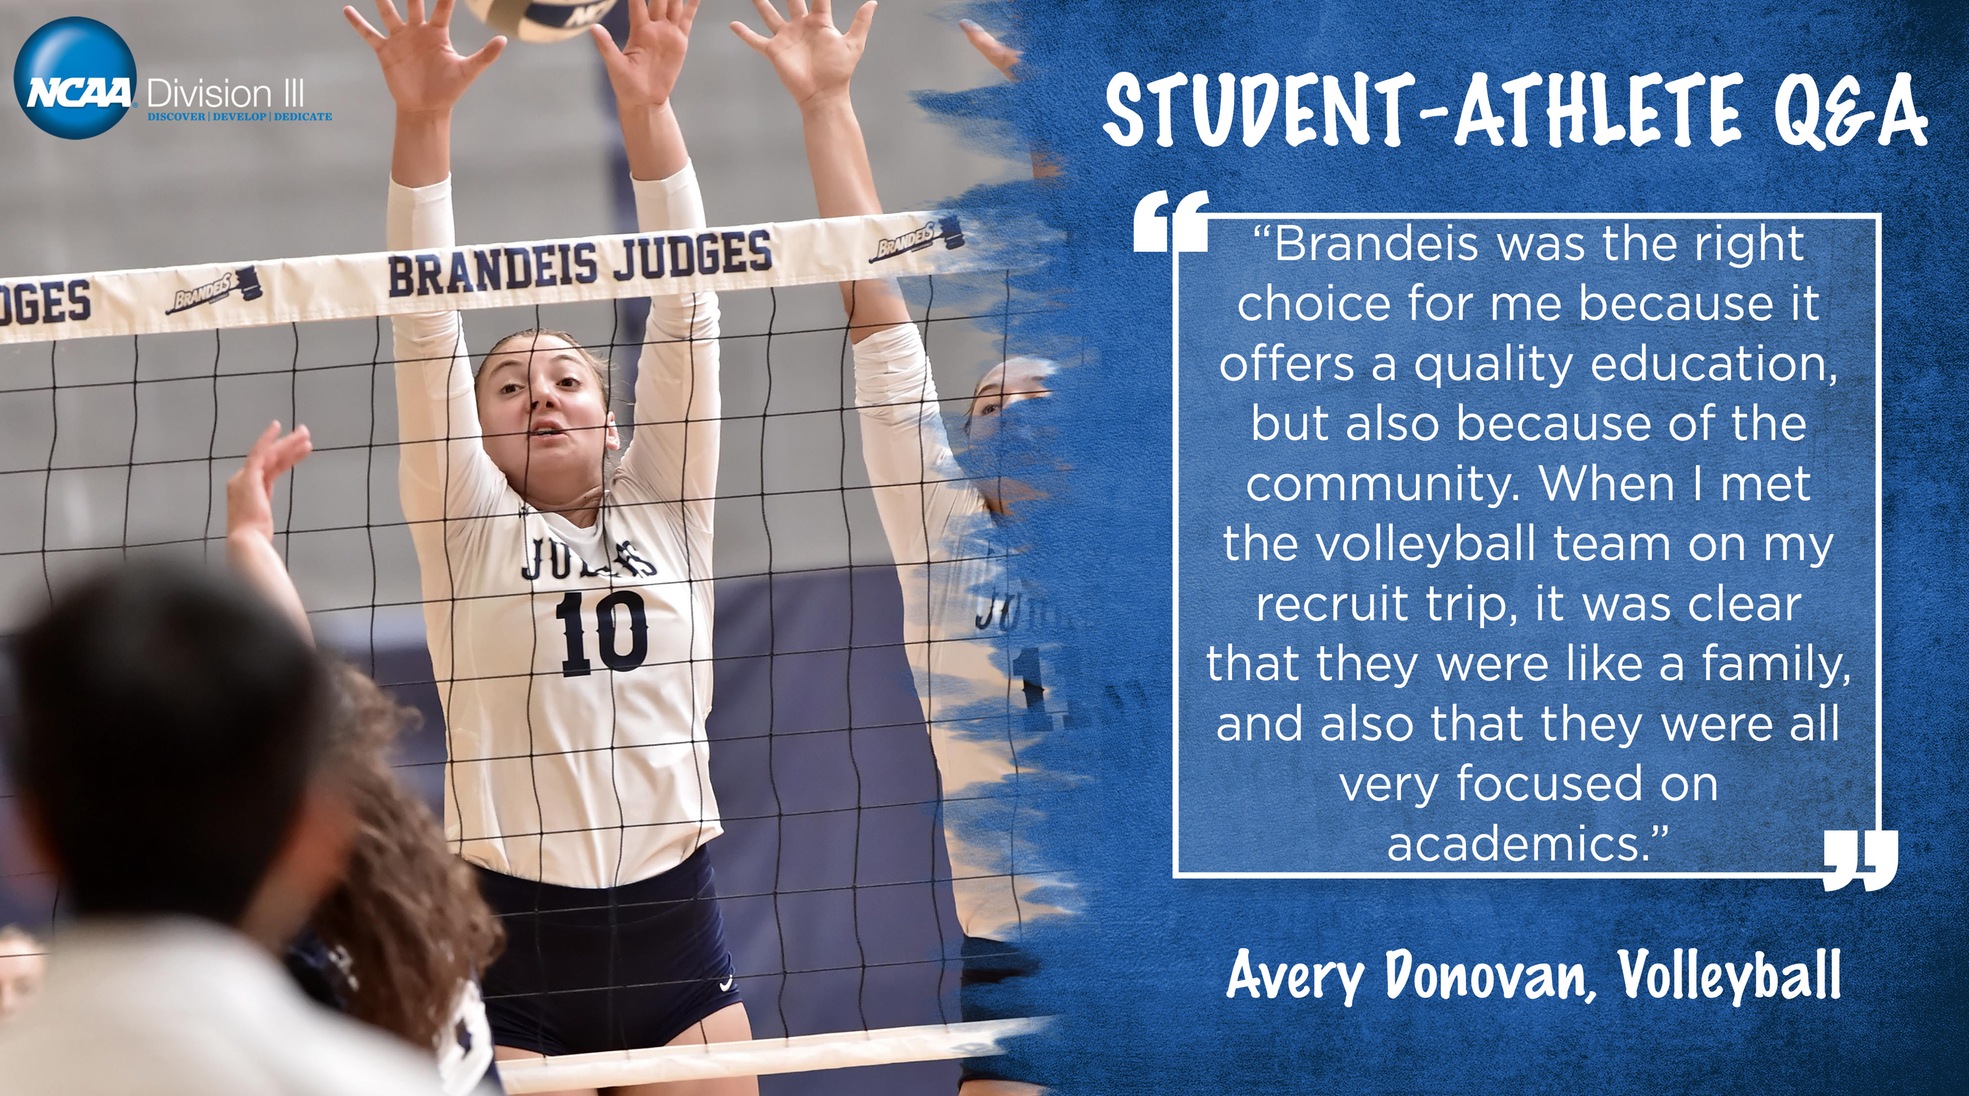 Student-Athlete Q&A: Avery Donovan, Volleyball: Brandeis was the right choice for me because it offers a quality education, but also because of the community. When I met the volleyball team on my recruit trip, it was clear that they were like a family, and also that they were all very focused on academics."